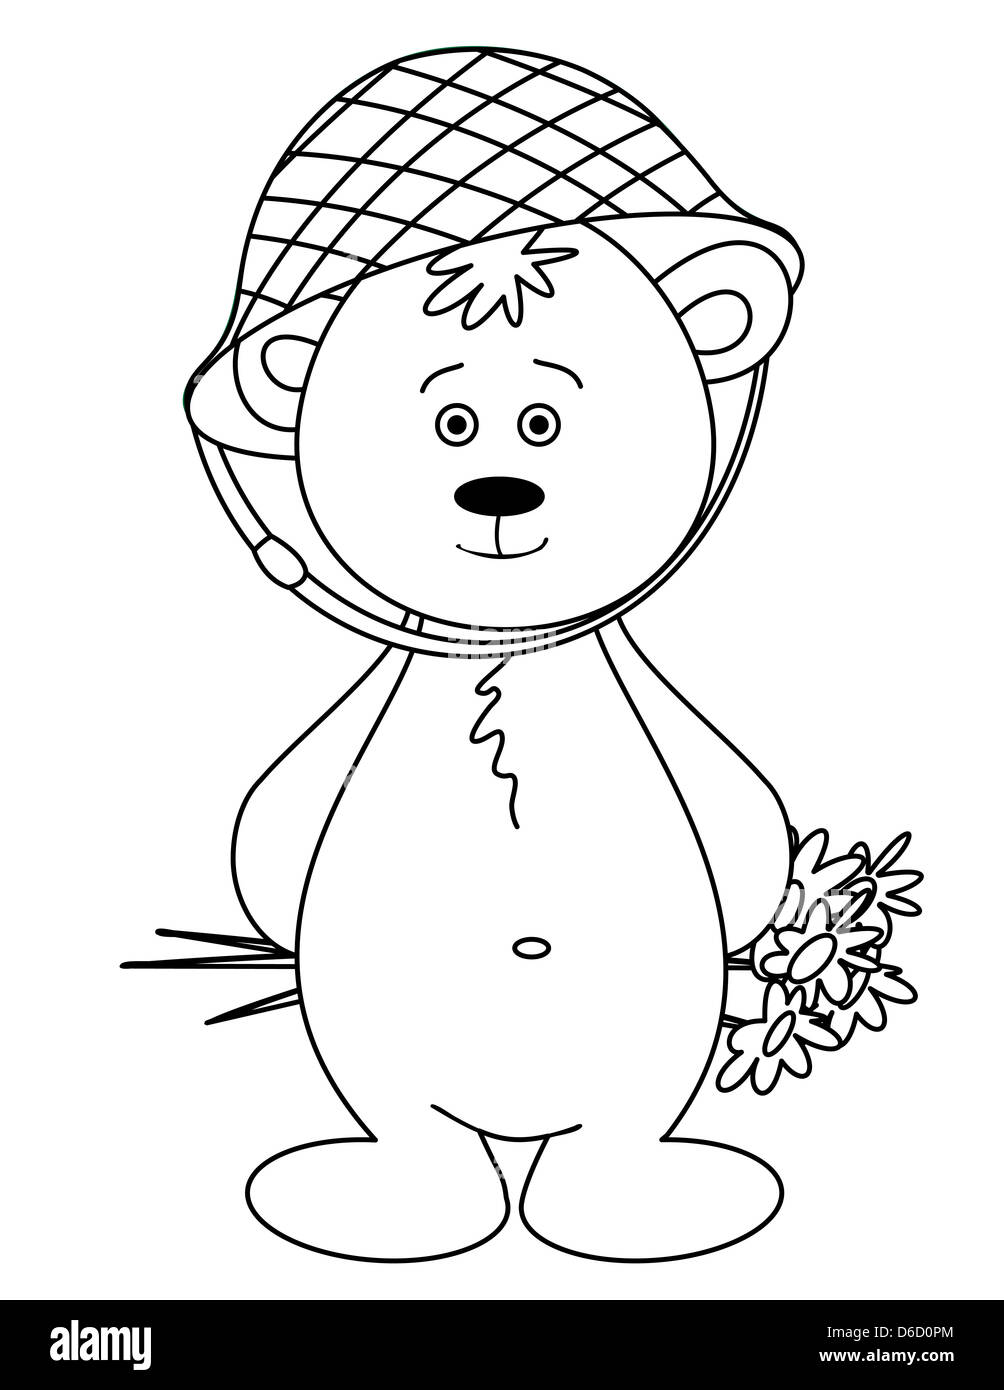 Teddy-bear in a helmet with a bouquet, contours Stock Photo